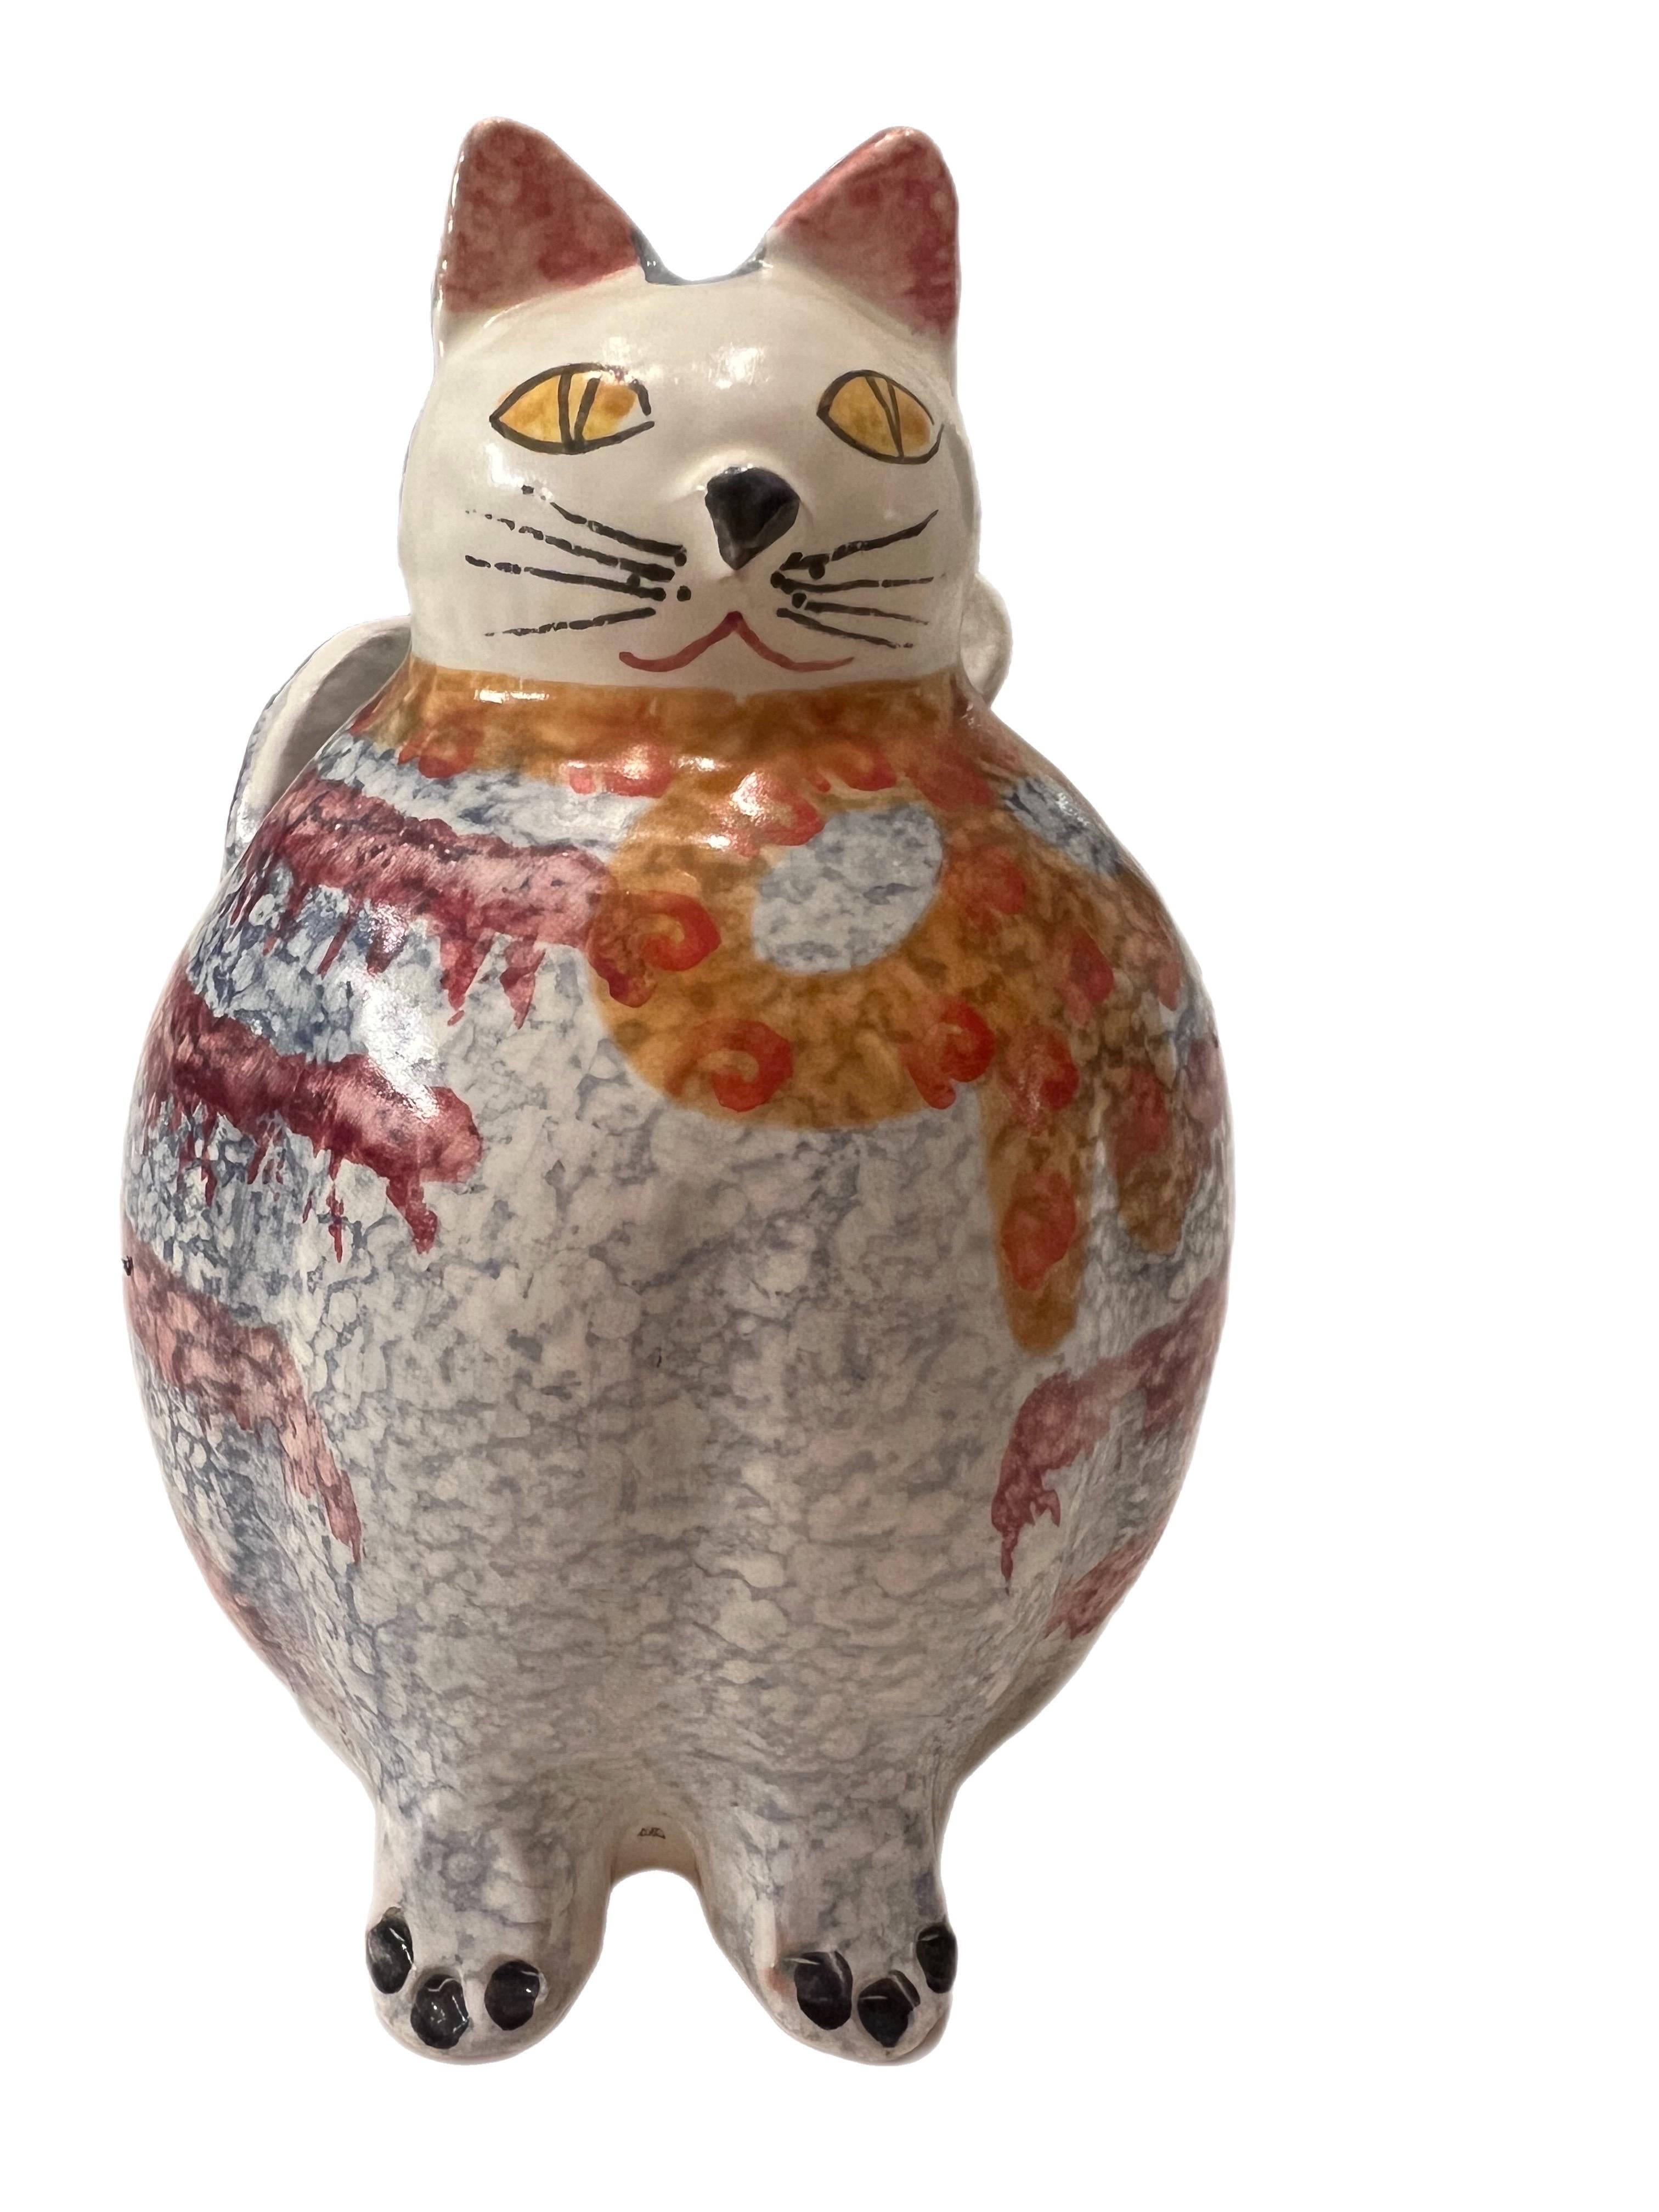 A vintage hand-painted Italian ceramic figural cat vase by Italica ARS. This piece depicts a cute blue and orange striped cat with bow and is marked to underside by maker.  This works as a vase, utensils, makeup brushes…